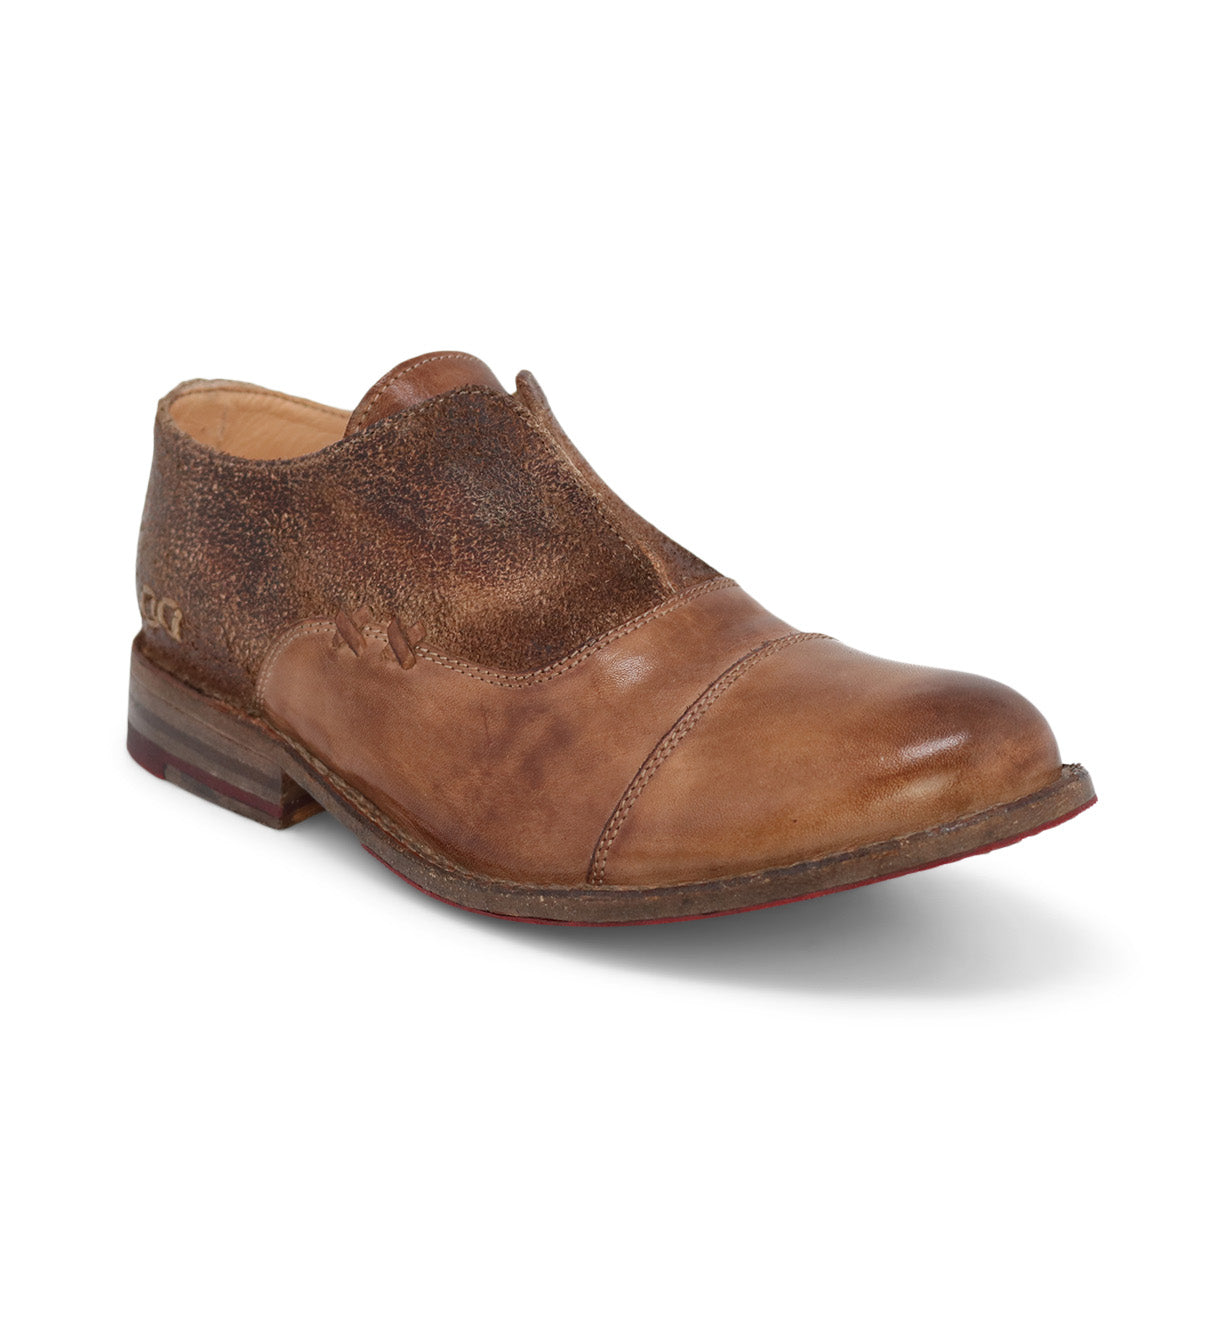 A Garden M leather shoe with a brown sole by Bed Stu.